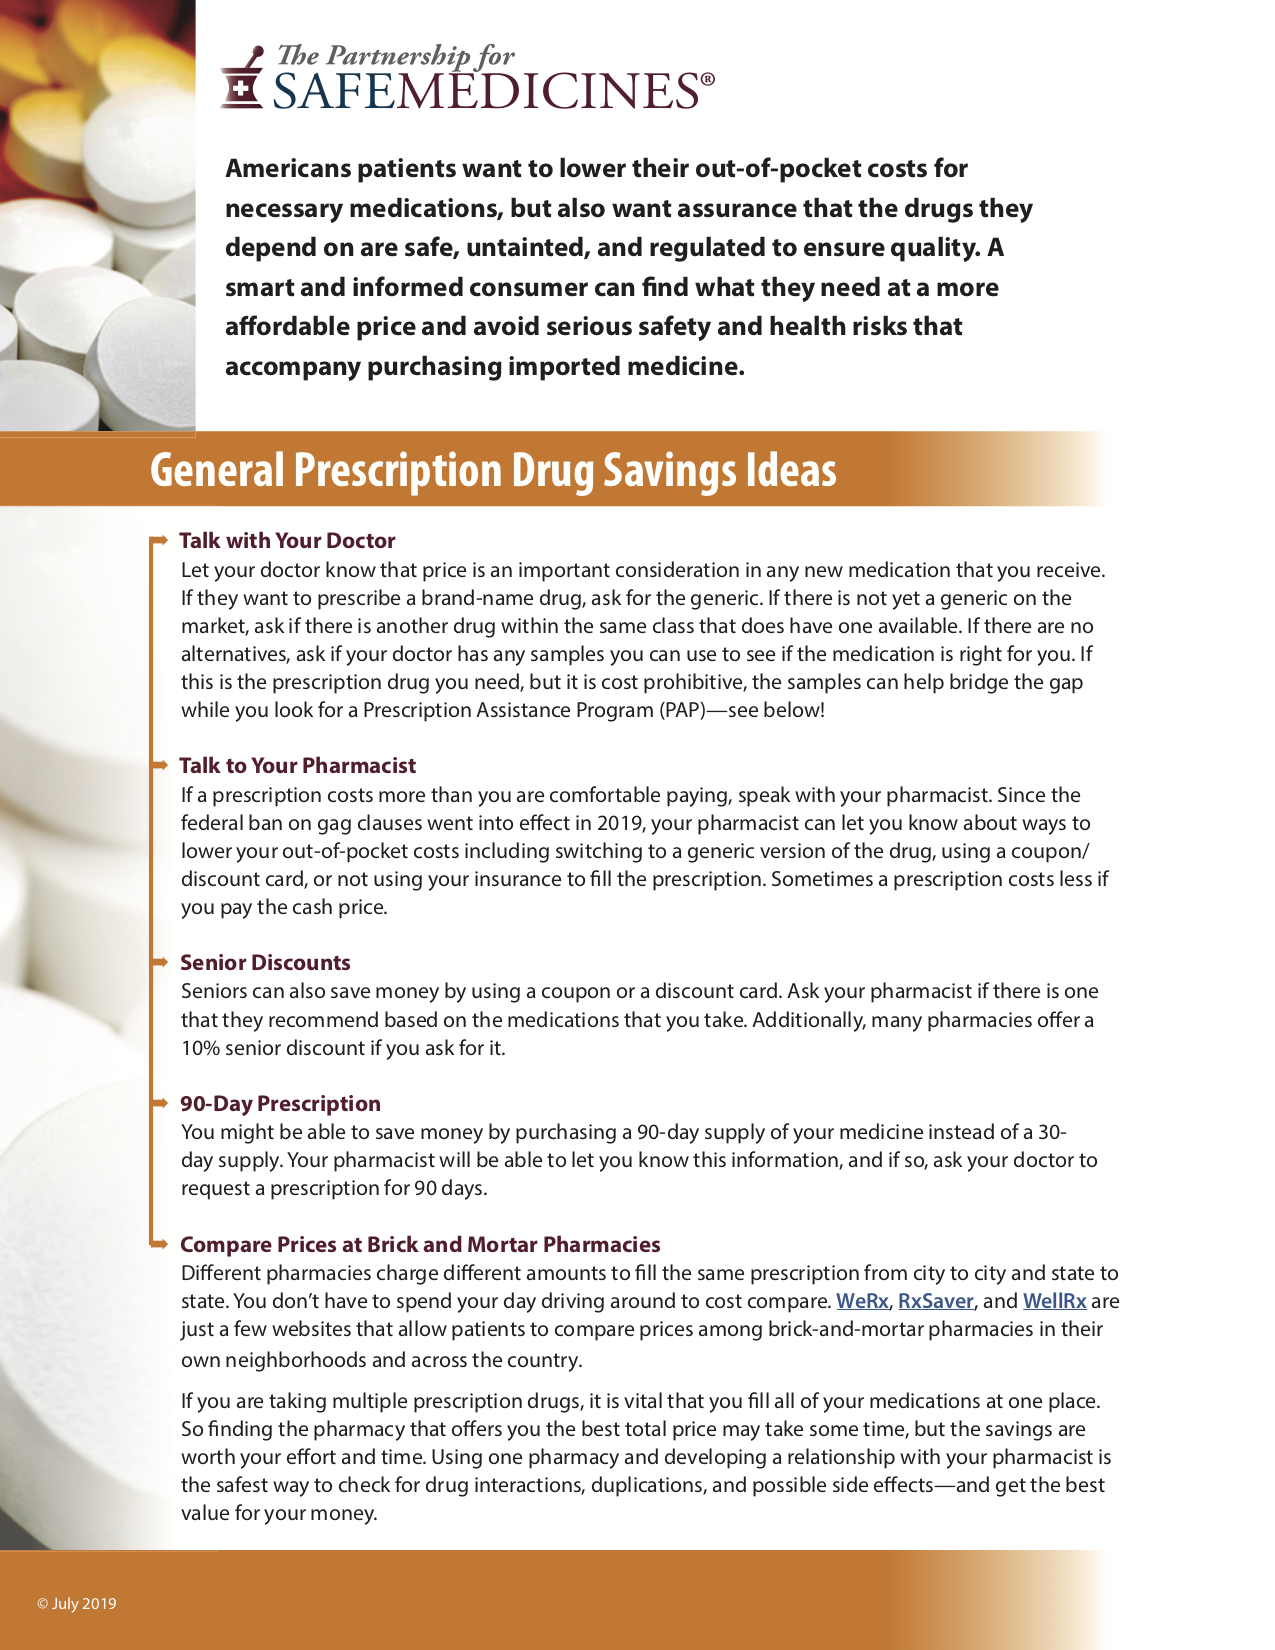 <a href="http://www.safemedicines.org/wp-content/uploads/2019/10/2019-SafeSavings-update-SECURE.pdf">Click here to download a print copy of our Safe Savings resource.</a>